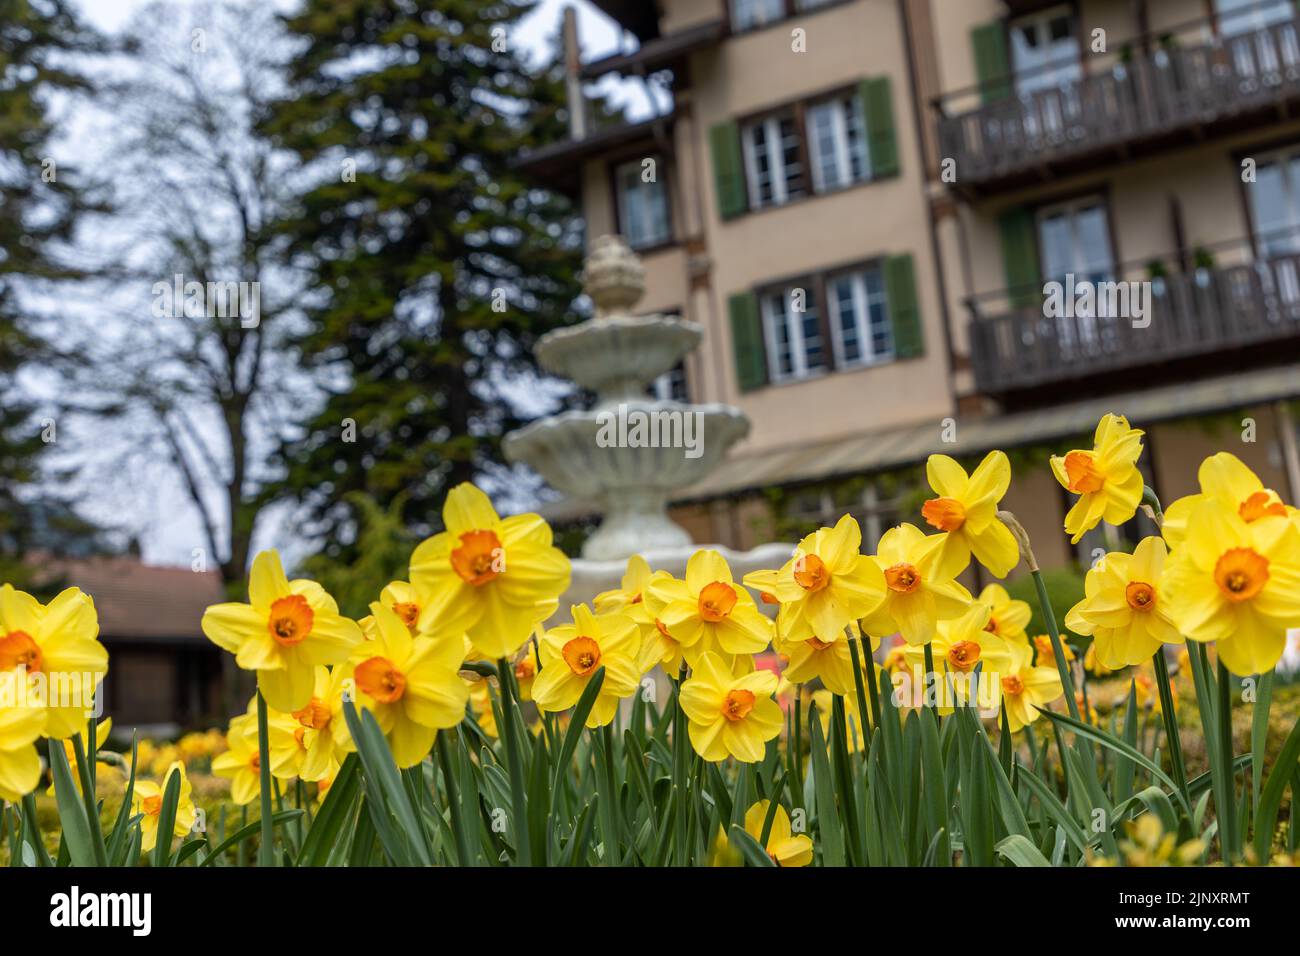 Selective focus on daffodil flowers in the bottom of the frame, in the background is a typical unrecognisable Swiss chalet building Stock Photo